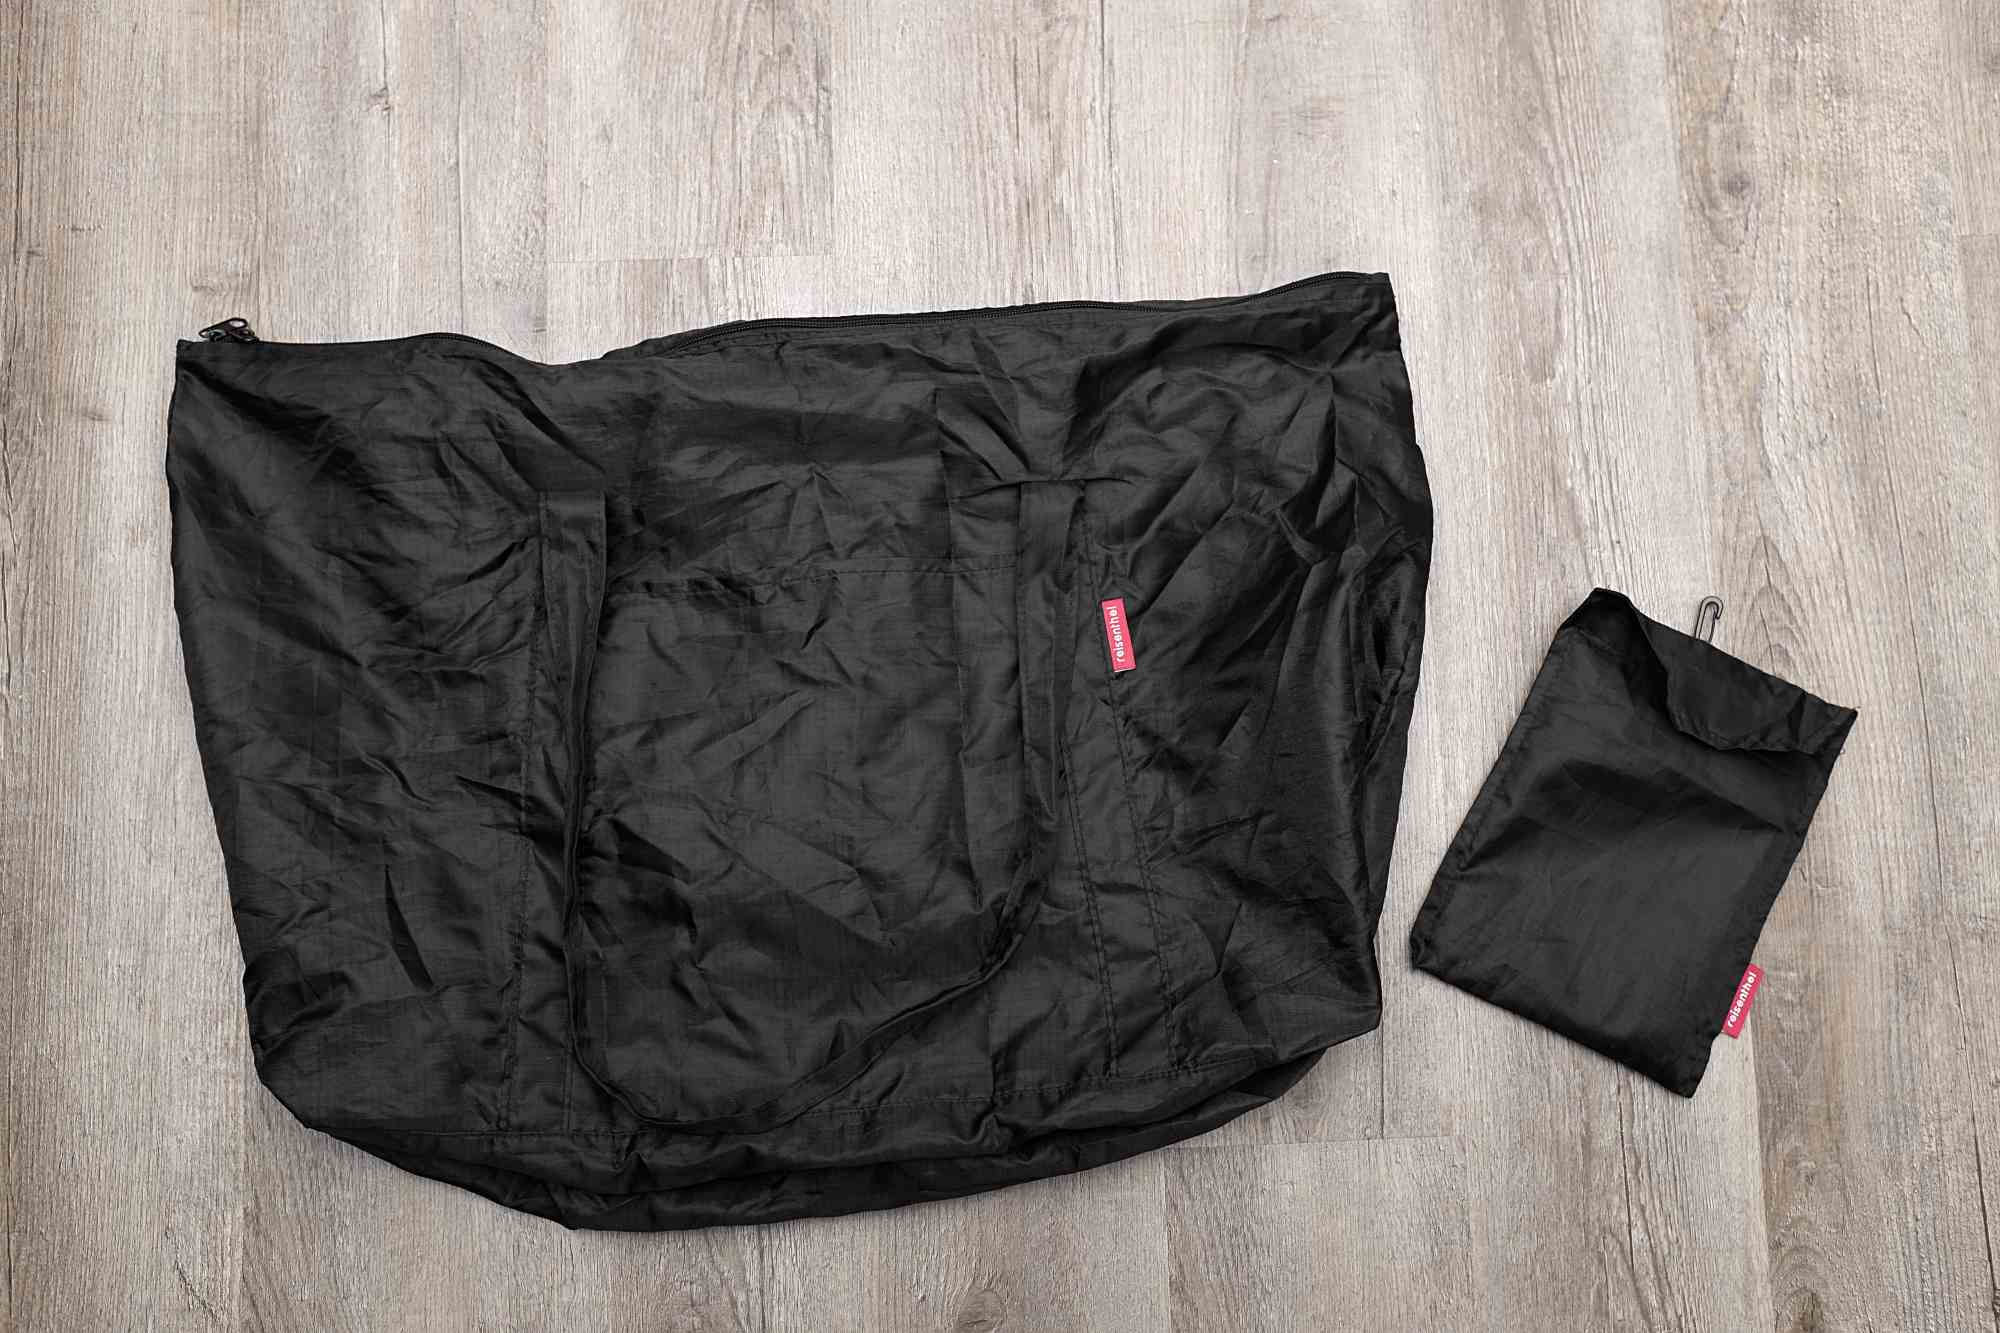 The tote lays flat on the floor next to the carry pouch